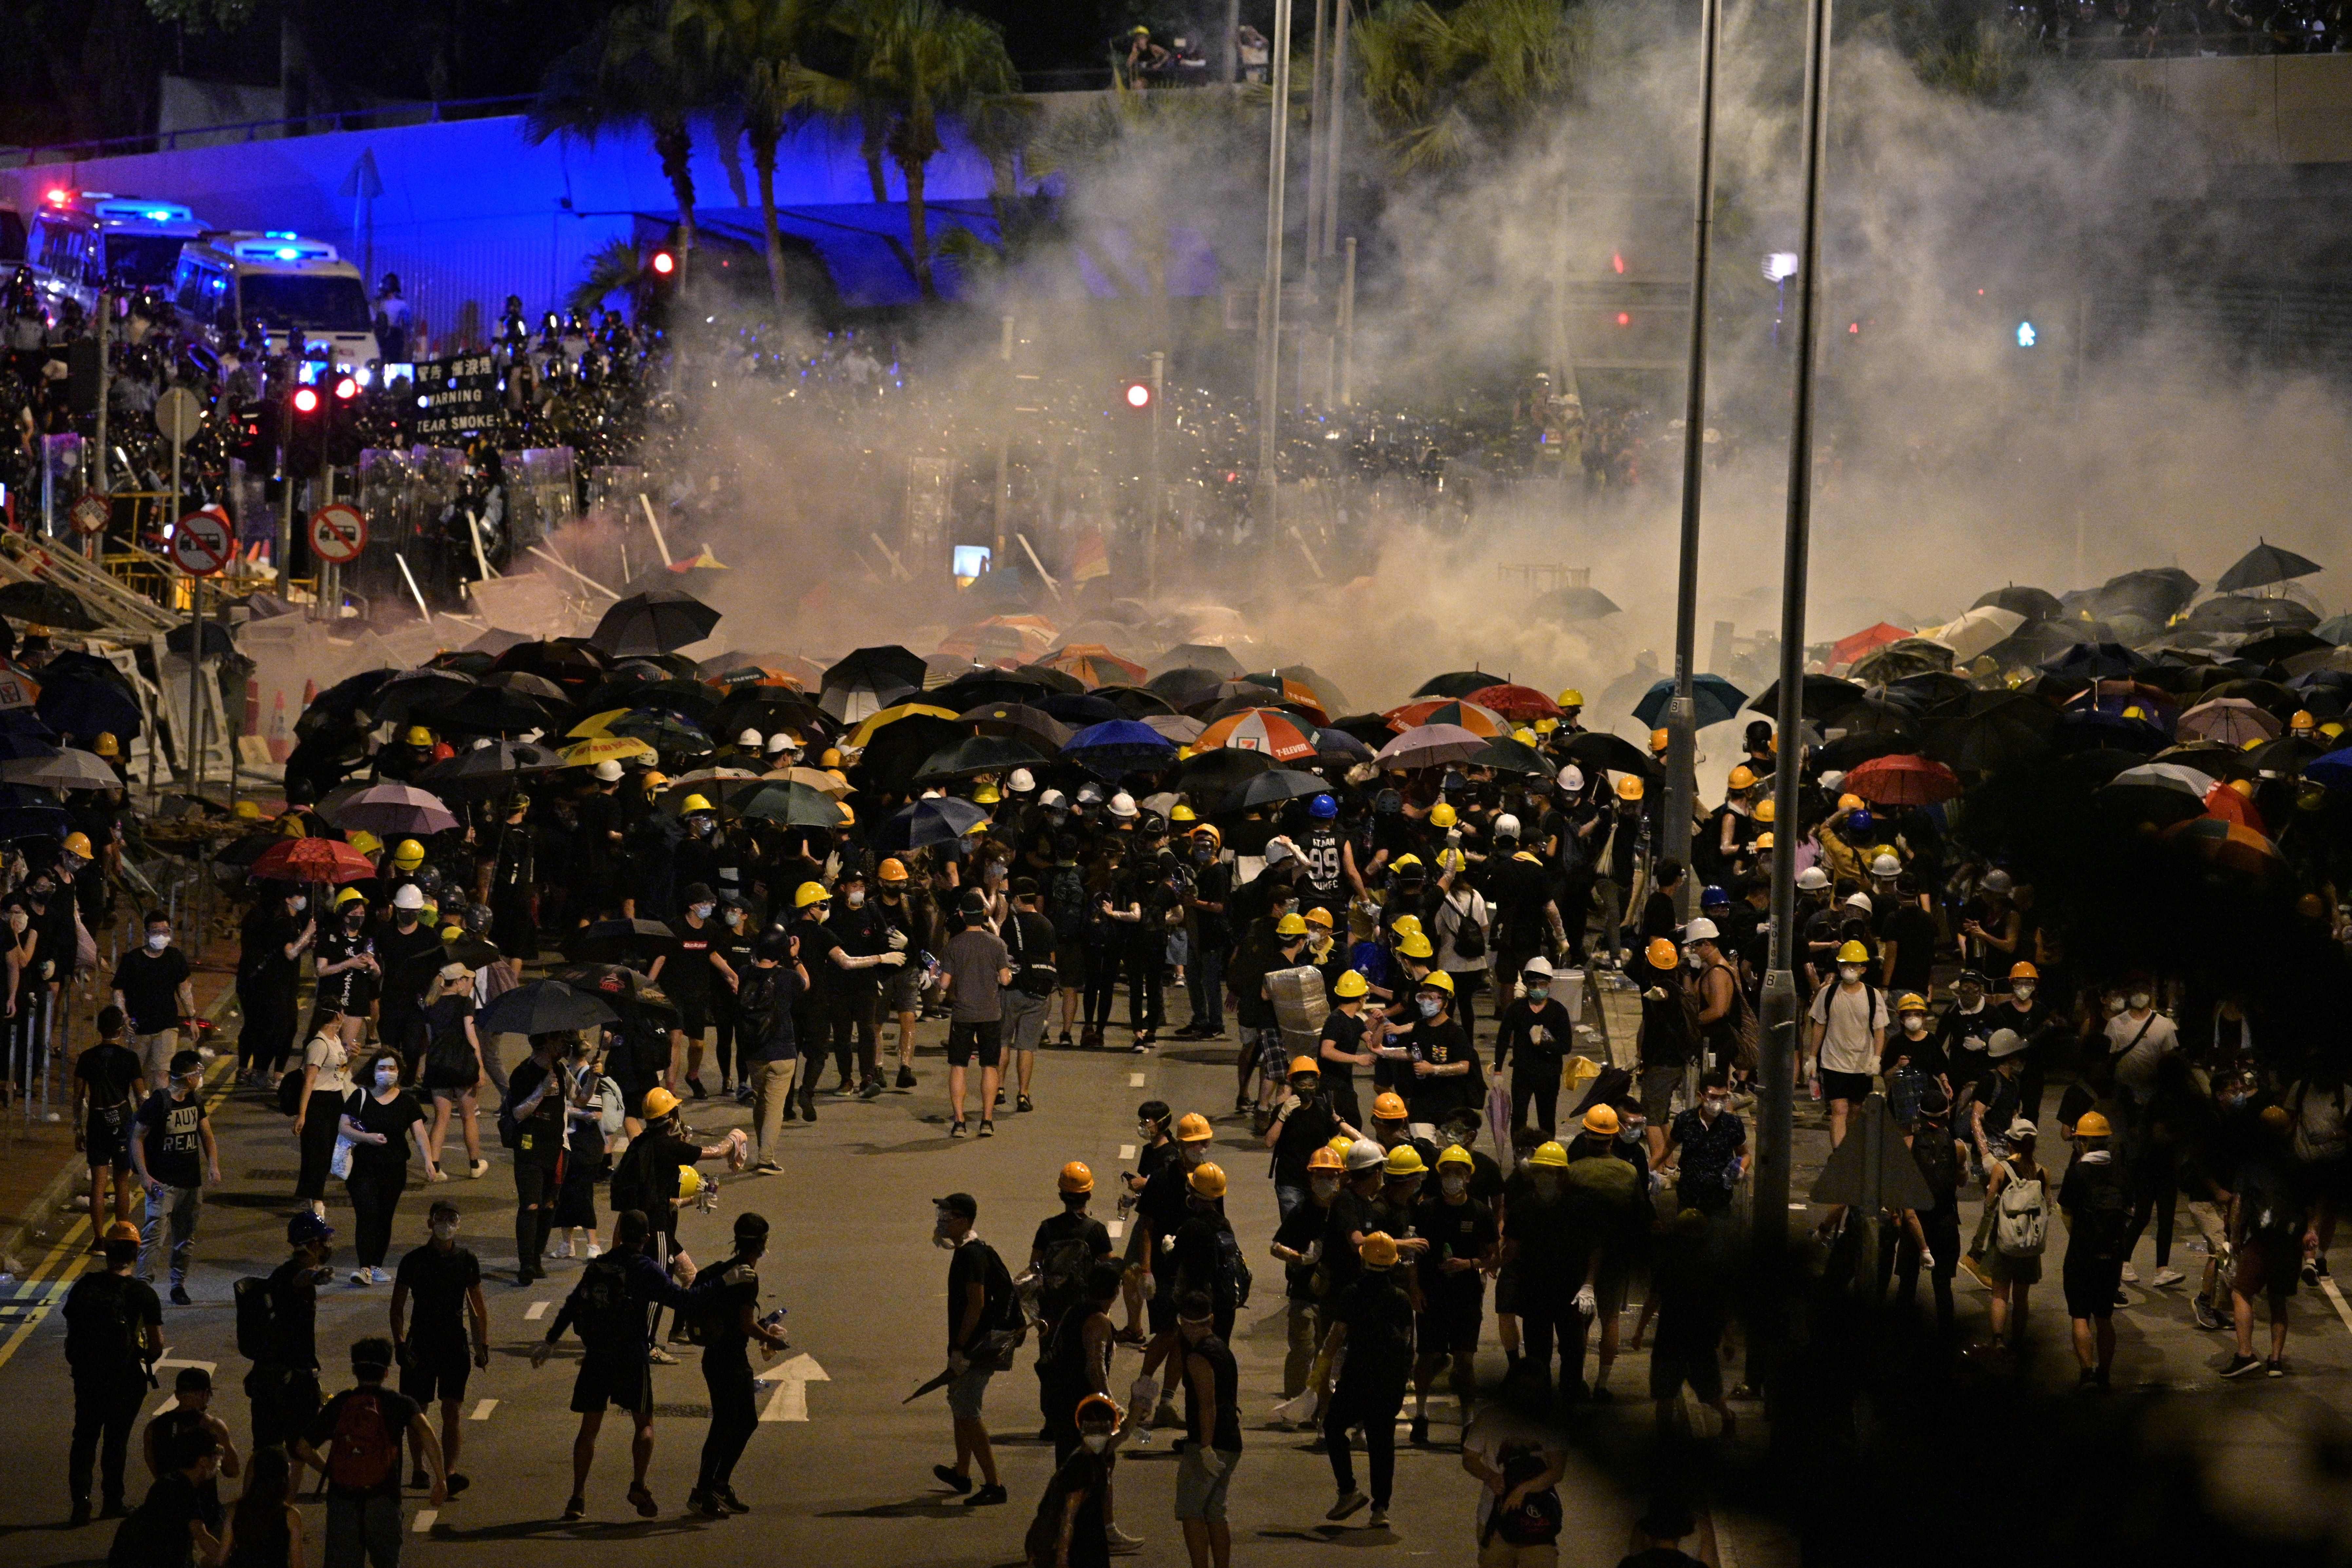  Police fire tear gas at protesters near the government headquarters in Hong Kong on July 2.